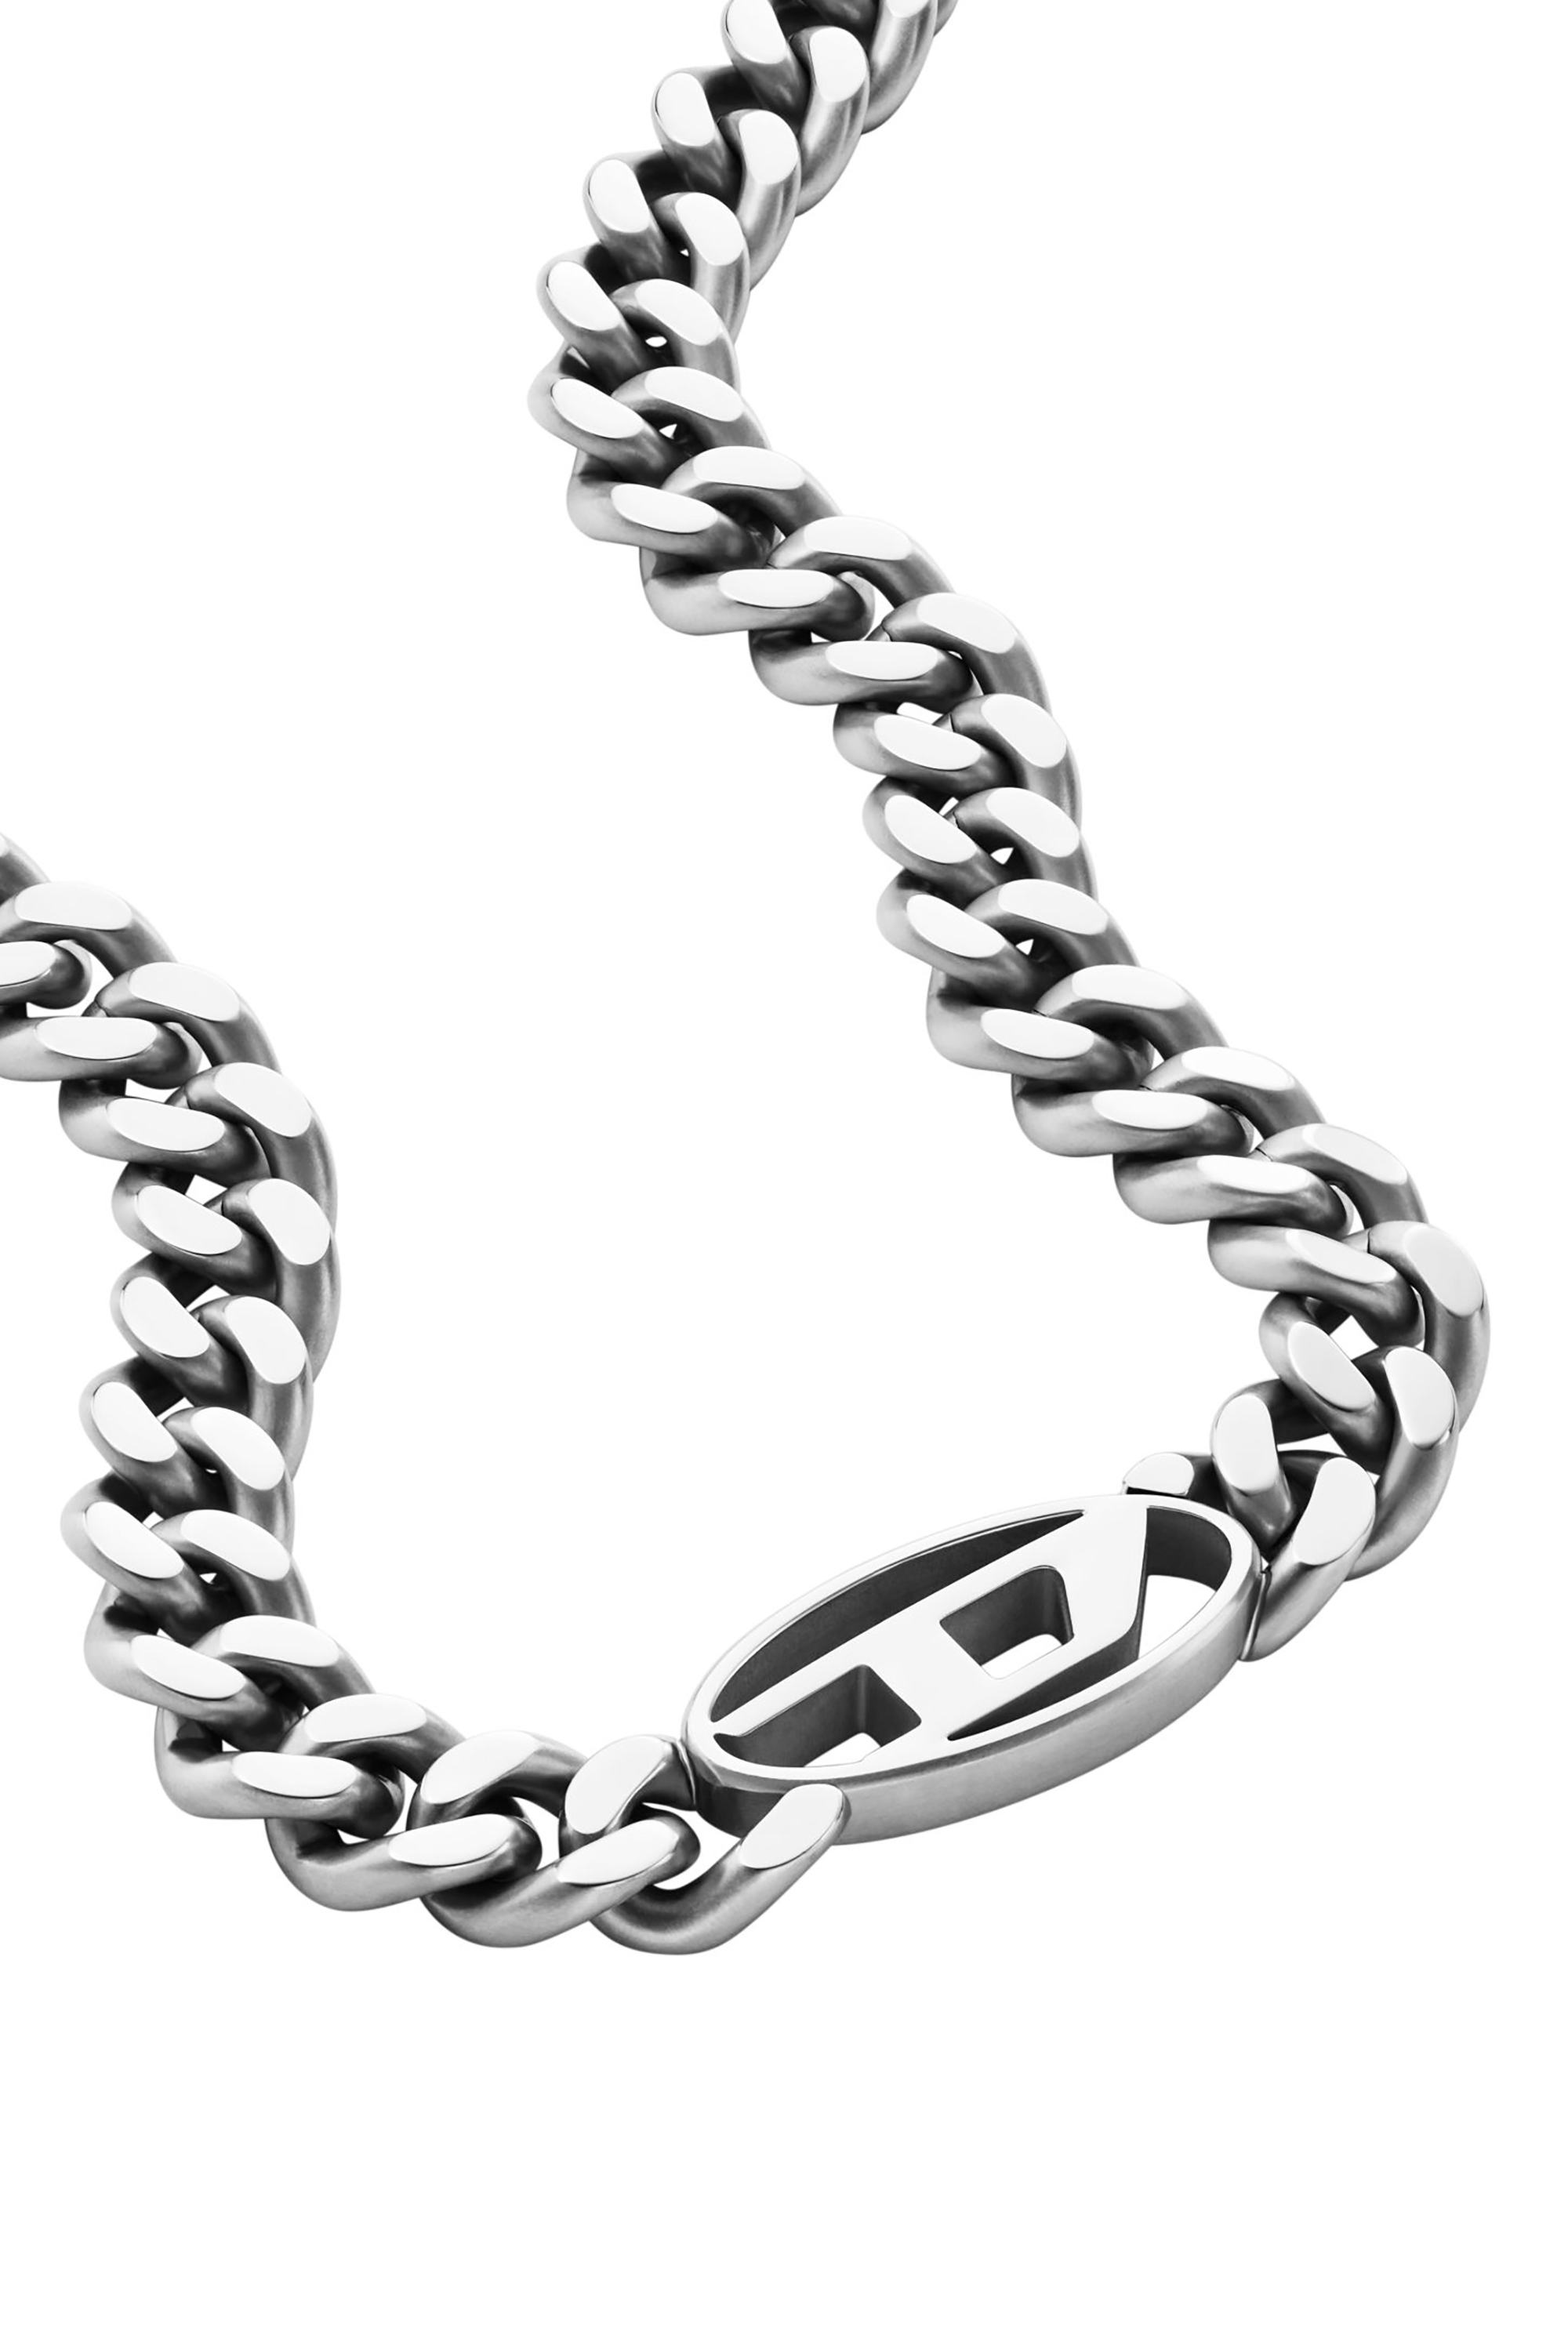 Steel, Necklaces: Stainless Chain Men\'s